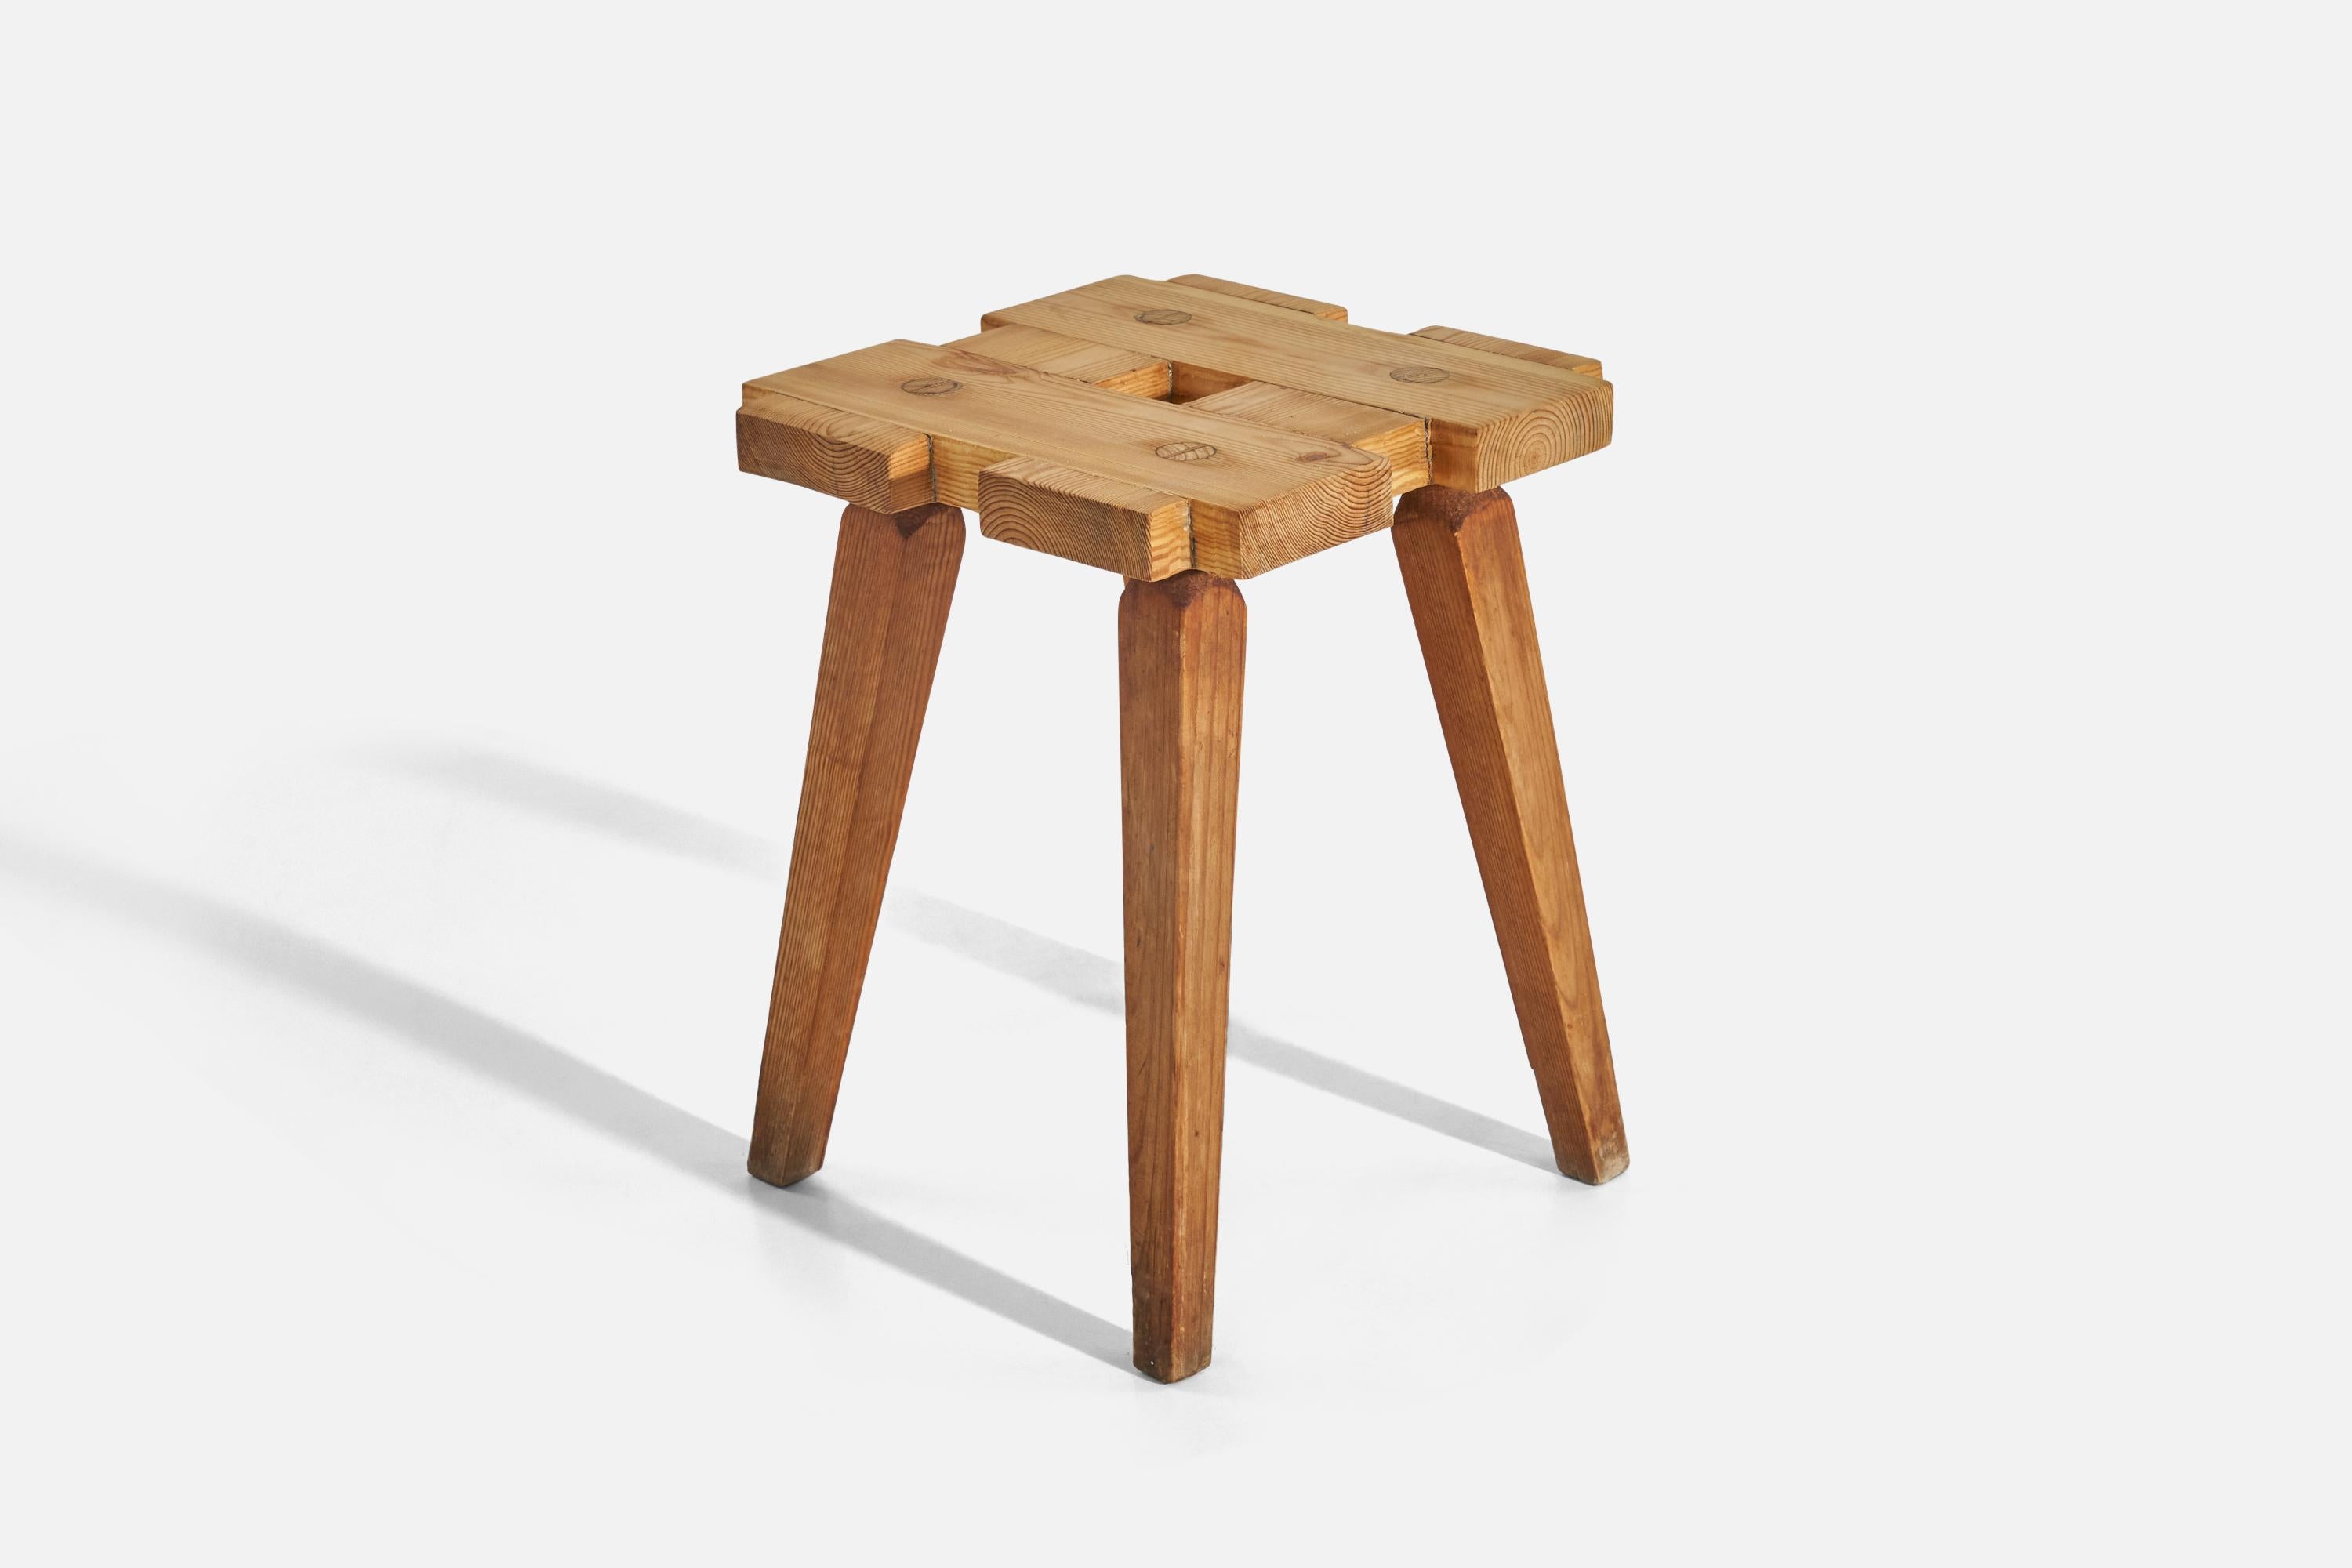 A solid pine stool designed and produced in Sweden, c. 1960s.